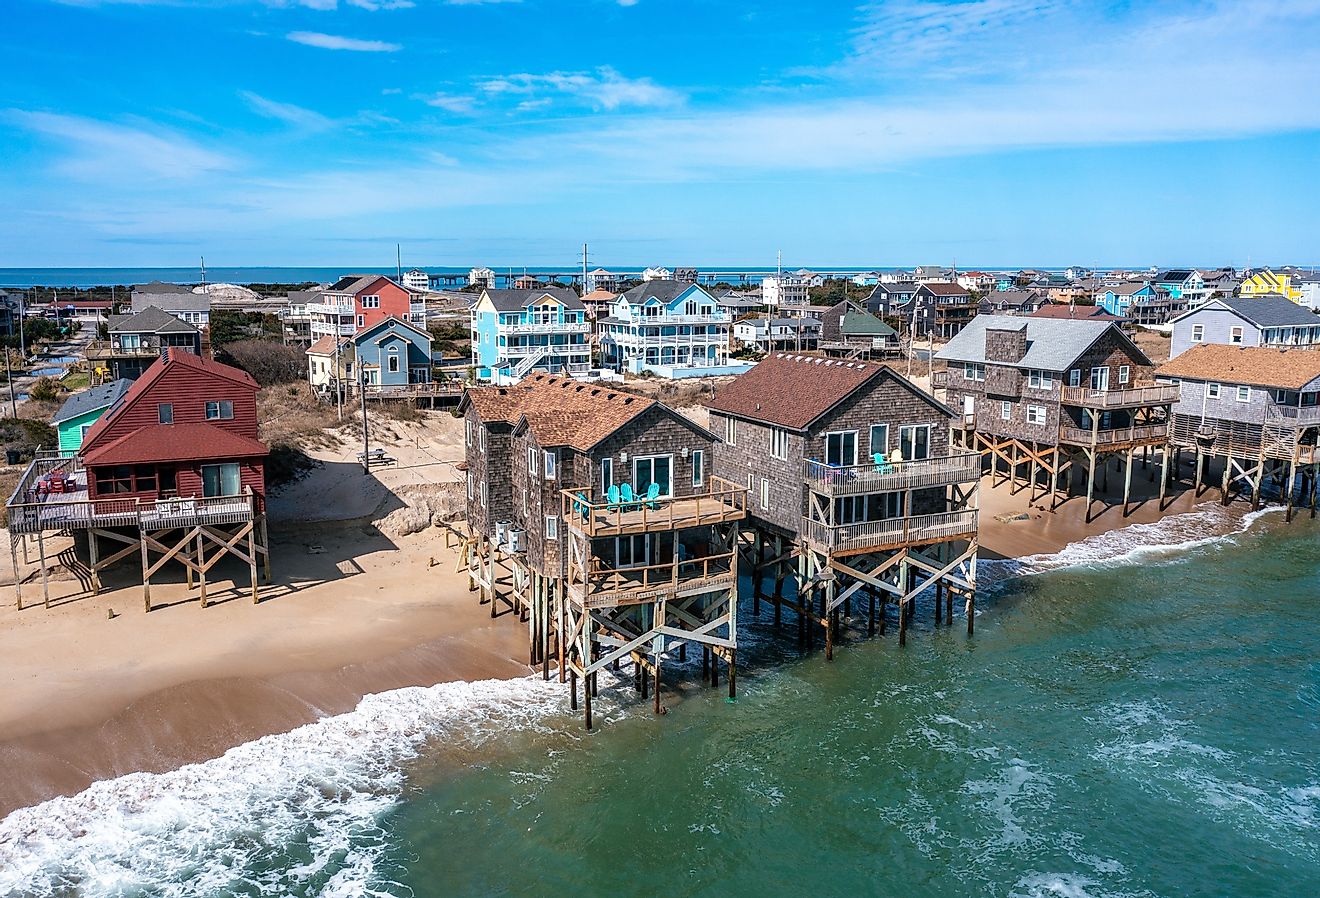 Aerial view of beach homes in Rodanthe North Carolina with pilings in the water at high tide on a sunny day.